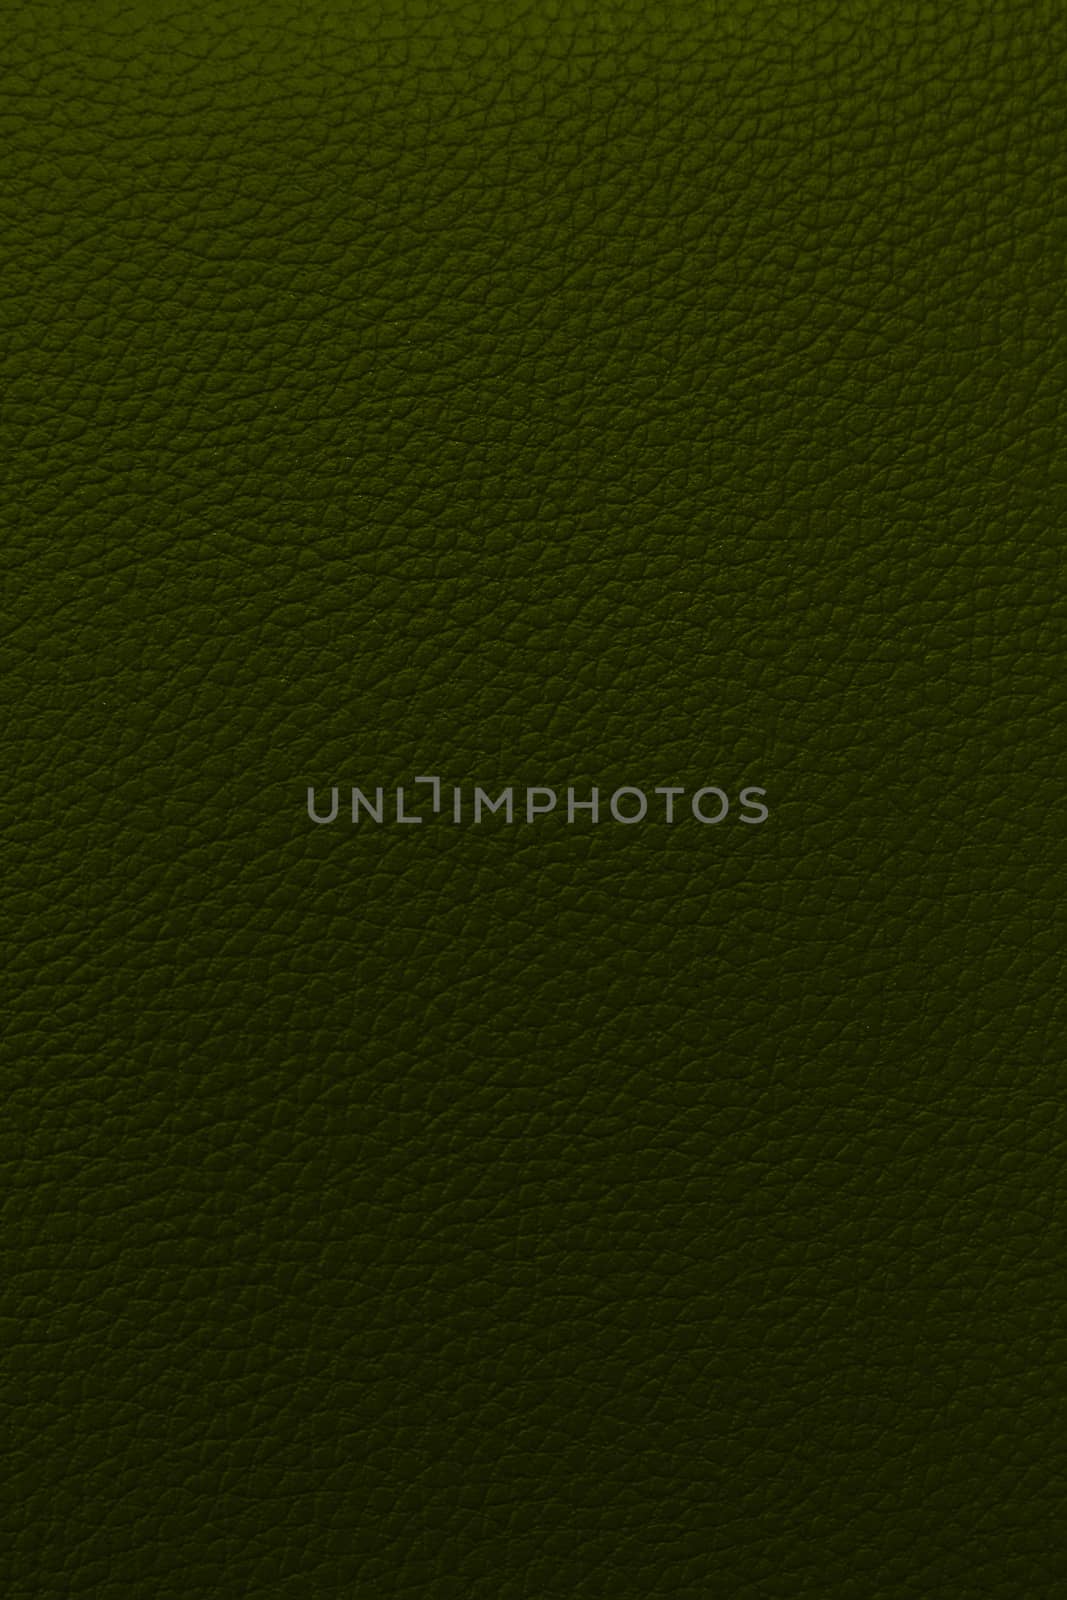 Leather or vinyl color sample background or texture. Brown color by sonandonures